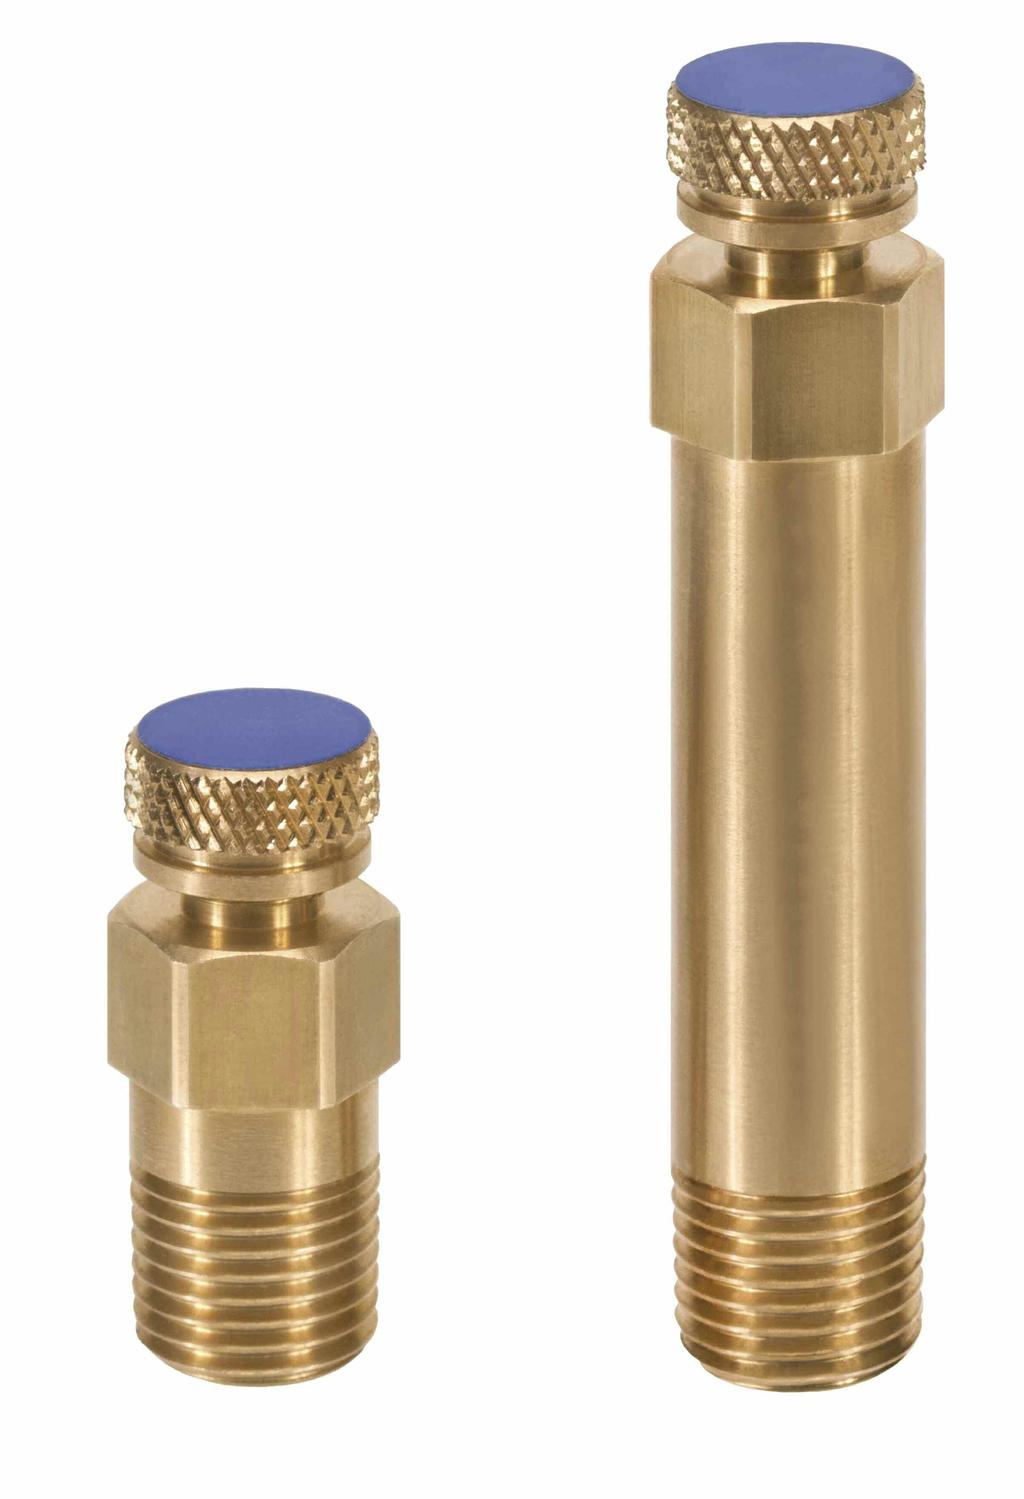 87 mm (20 mesh) Connections: - body: 1/2", 3/4", 1", 1 1/4" FNPT union x FNPT, or sweat union x sweat Pressure and temperature ports: 1/4" NPT Drain port connection: 1/4" for 1/2" & 3/4"; 1/2" for 1"